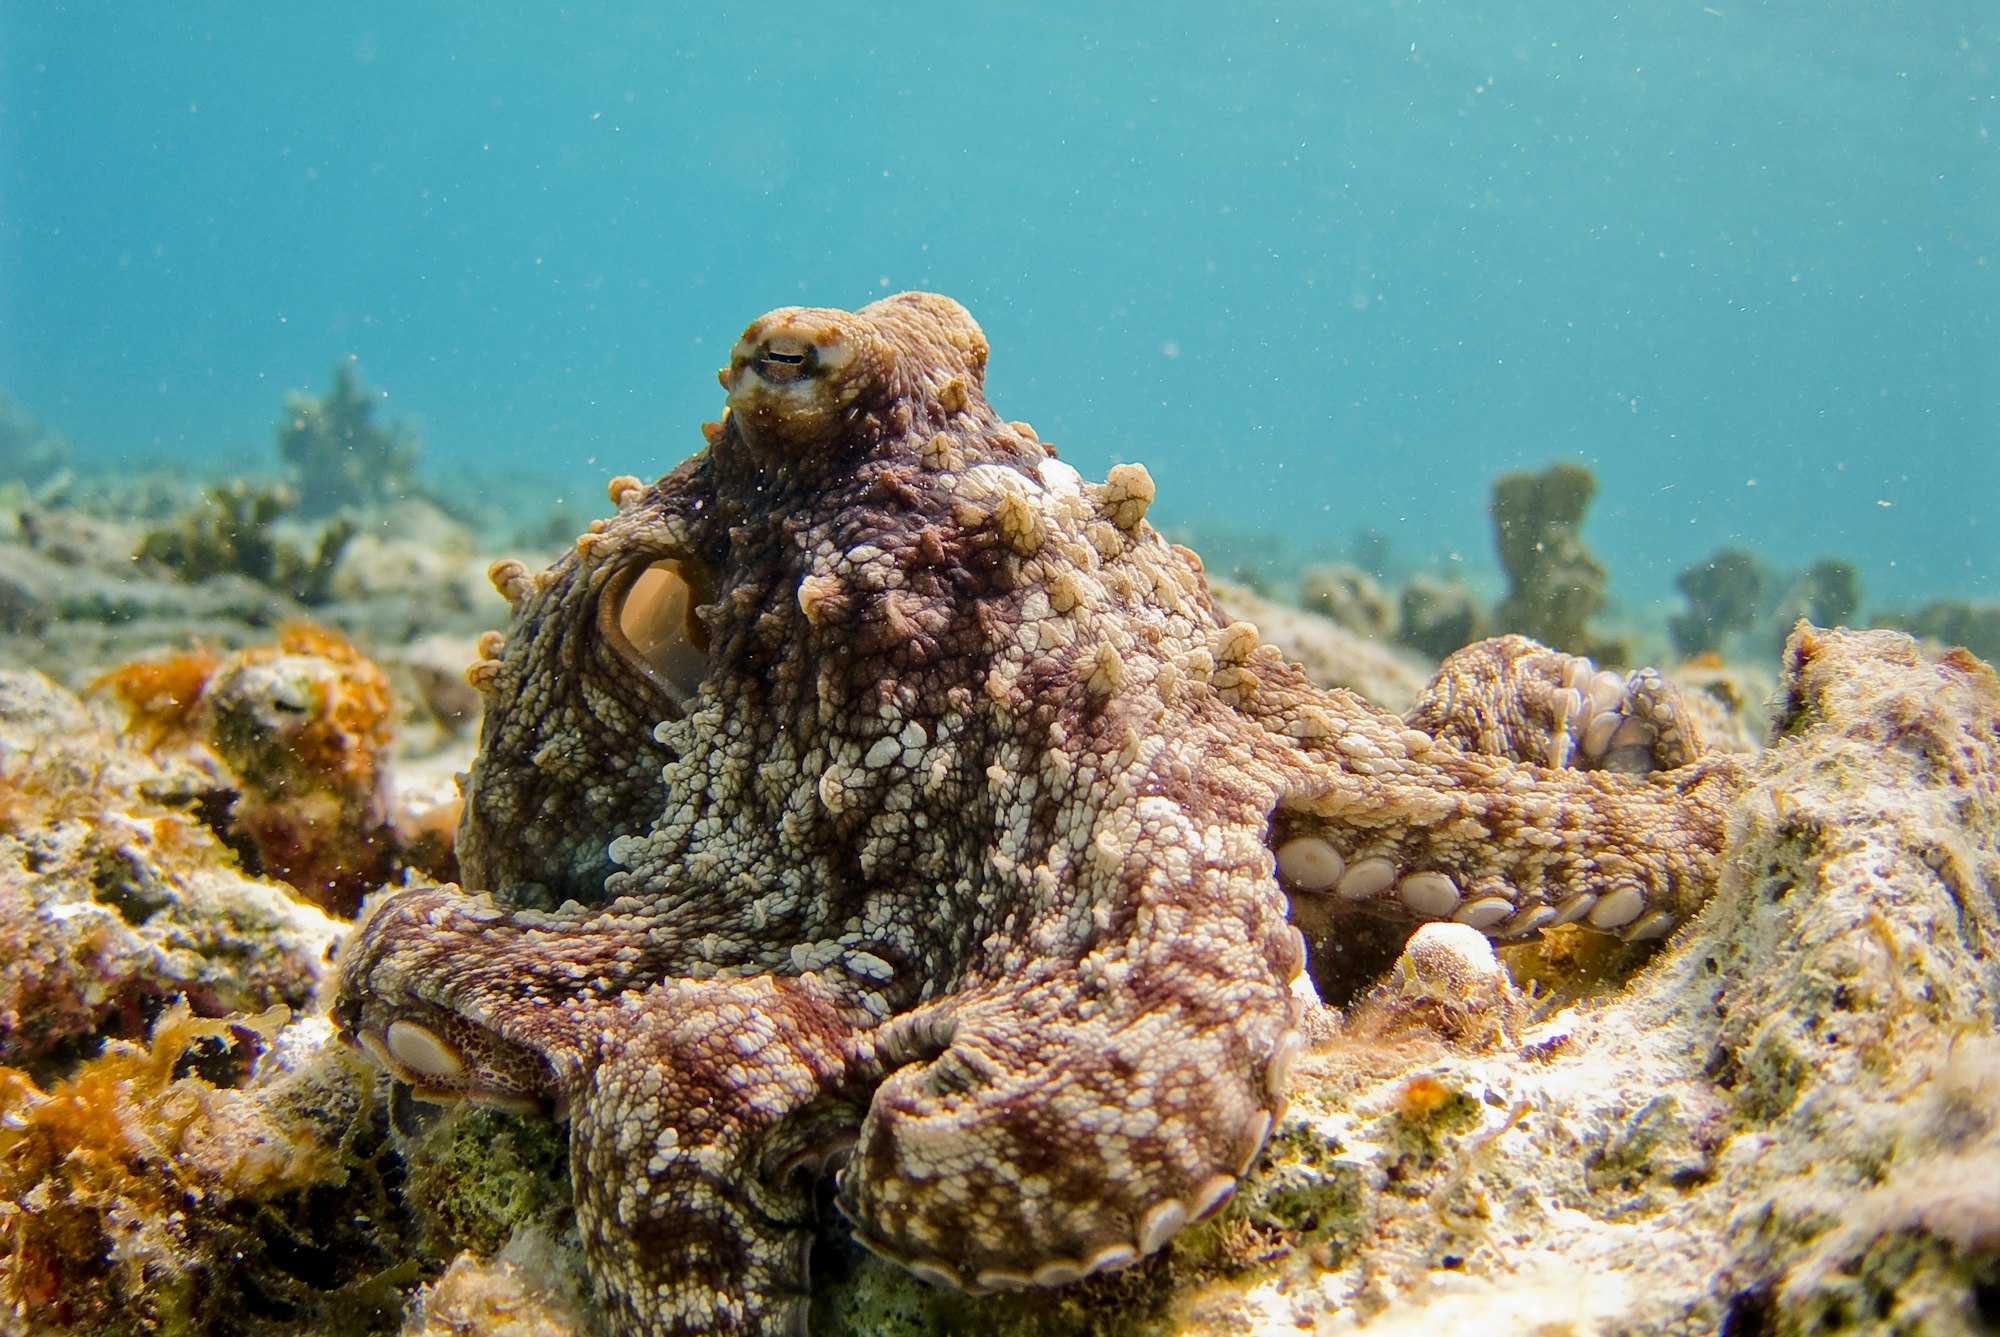 Octopuses Have Neurons in Their Arms, Allowing Them to Taste with Their Limbs! 🐙👅